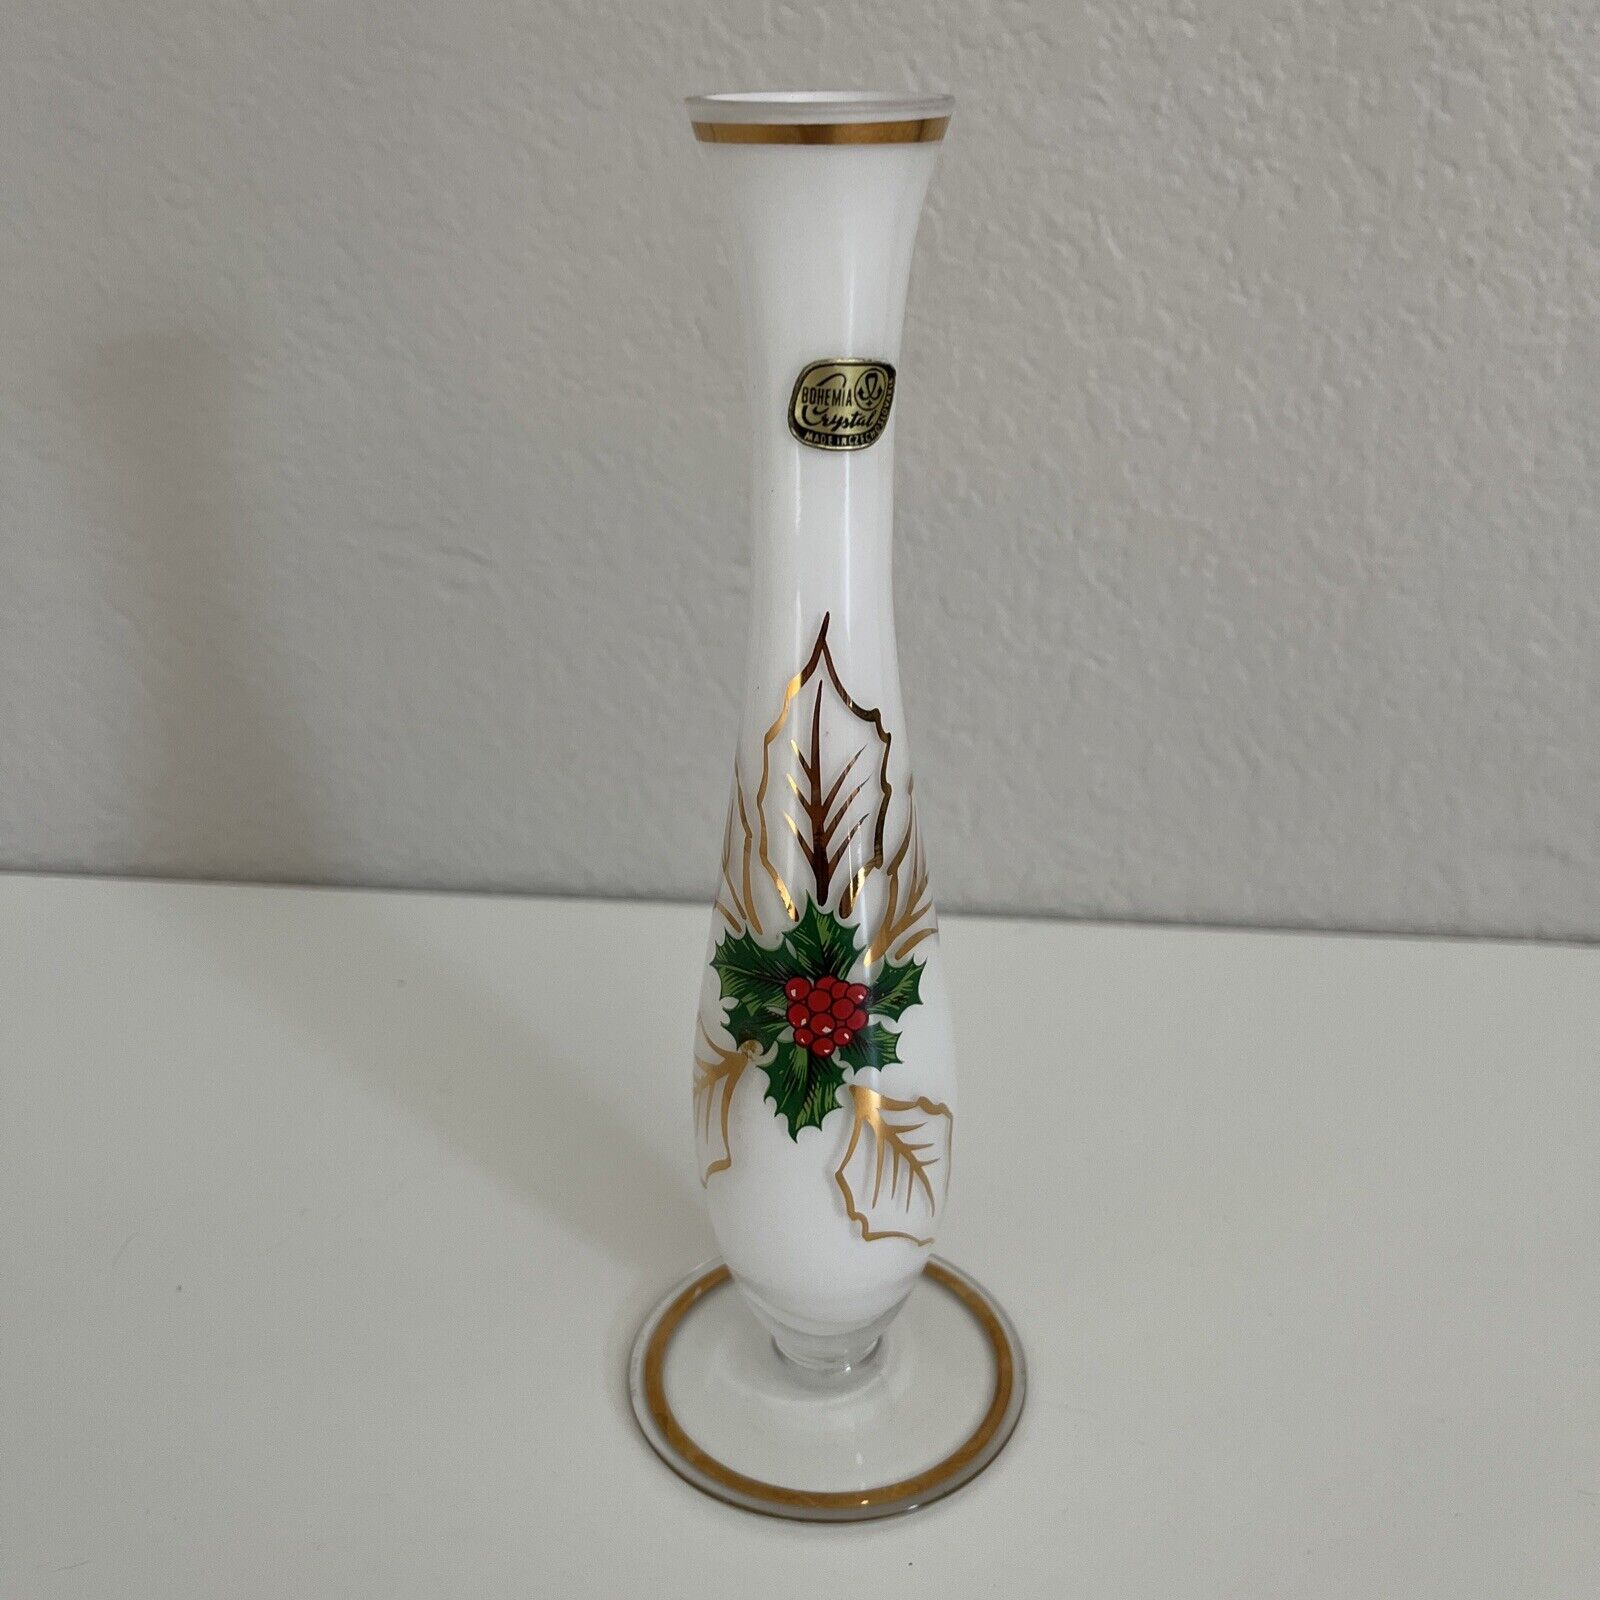 Bohemia Crystal Pedestal  Bud Vase White Glass Hand Painted Holly Berries